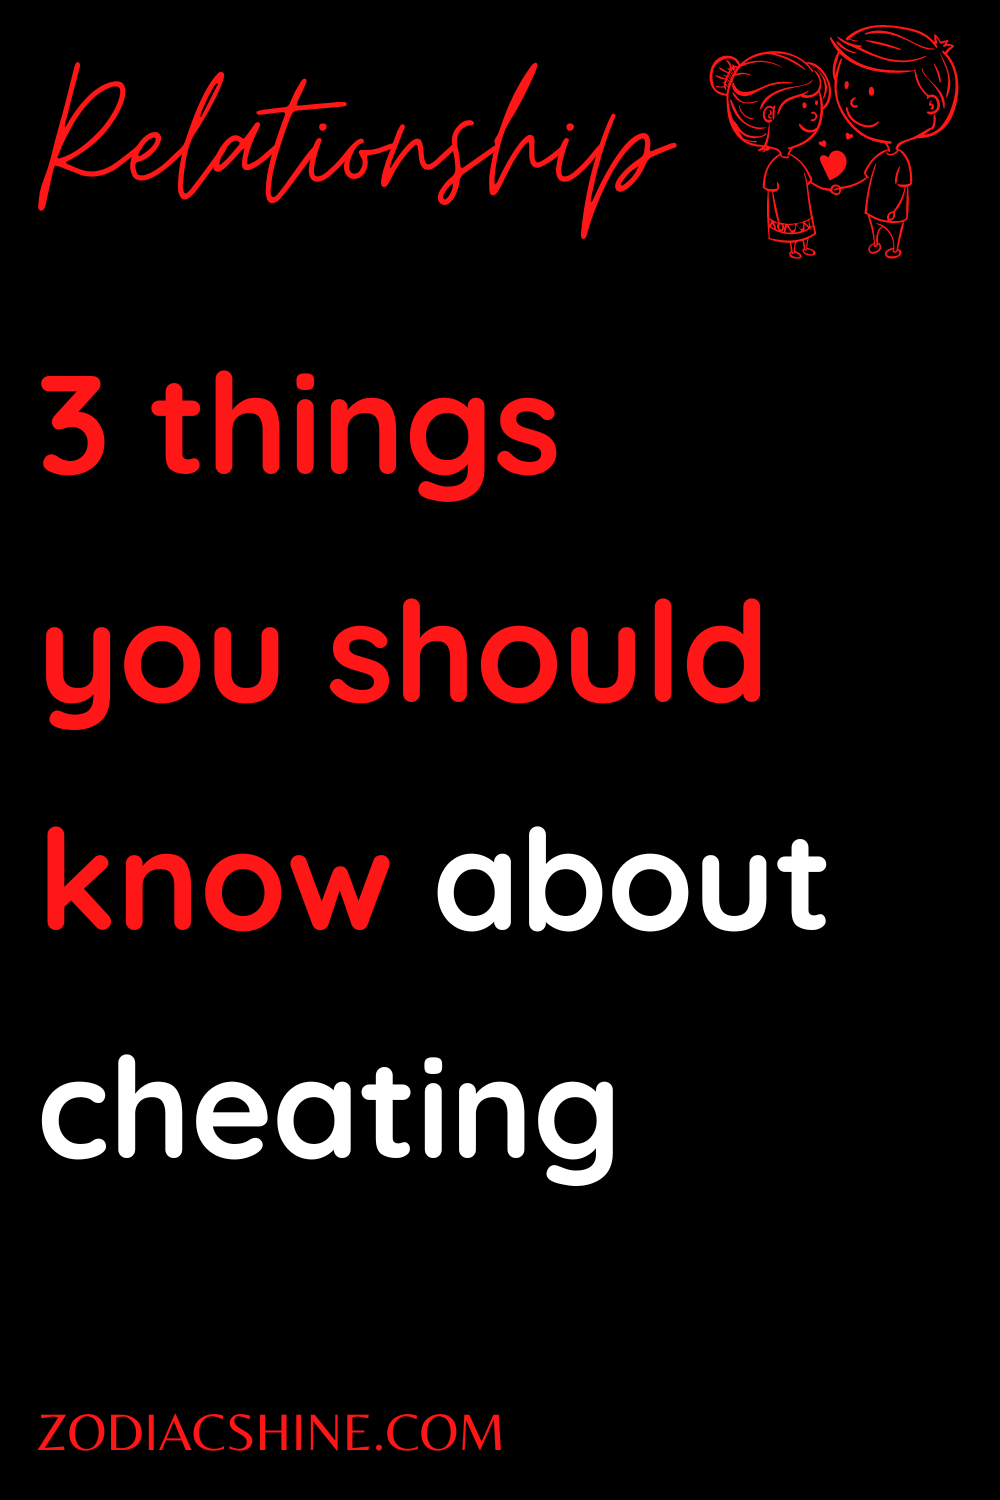 3 things you should know about cheating